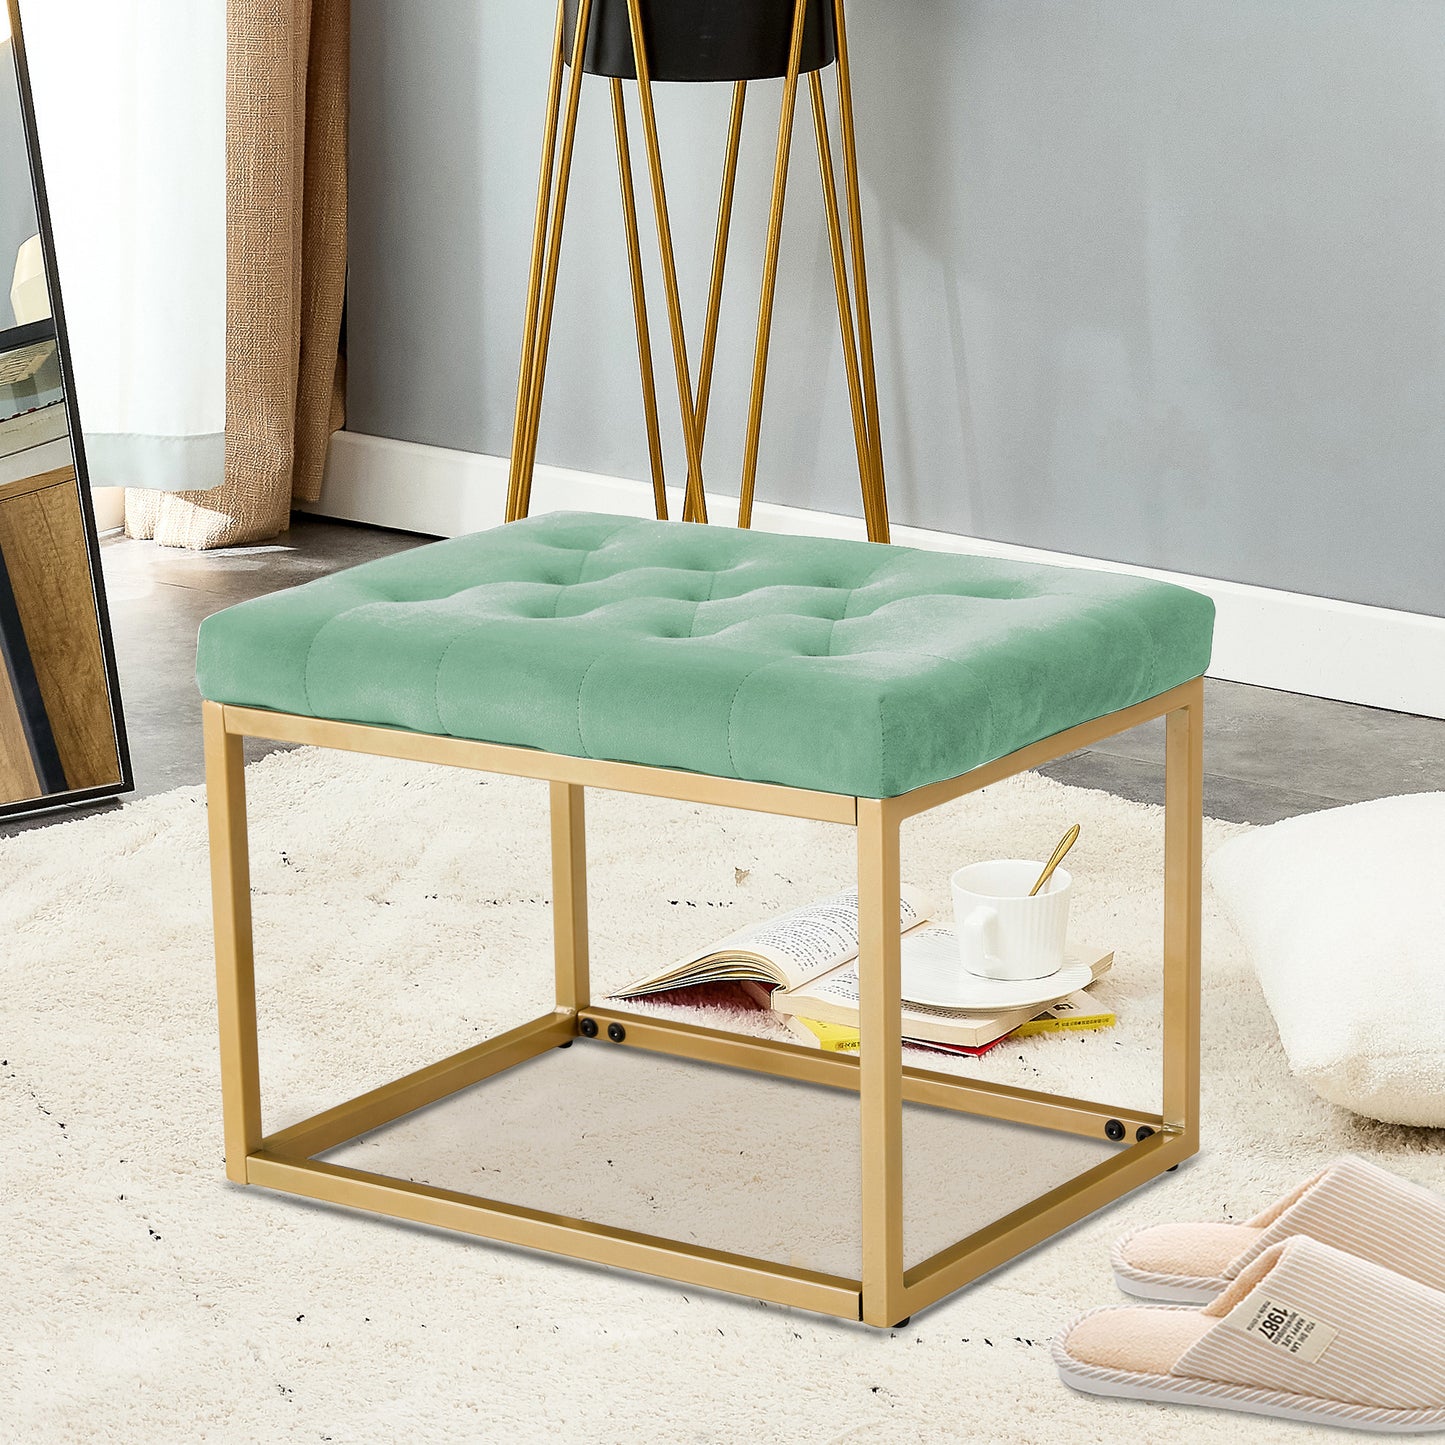 Velvet Shoe Changing Stool,Light green Footstool, Square Vanity Chair, Sofa Stool,Makup Stool Rest Stool. Piano Bench.Suitable for Clothes Shop,Living Room, Porch, Fitting Room Bedroom ST-001-DGN